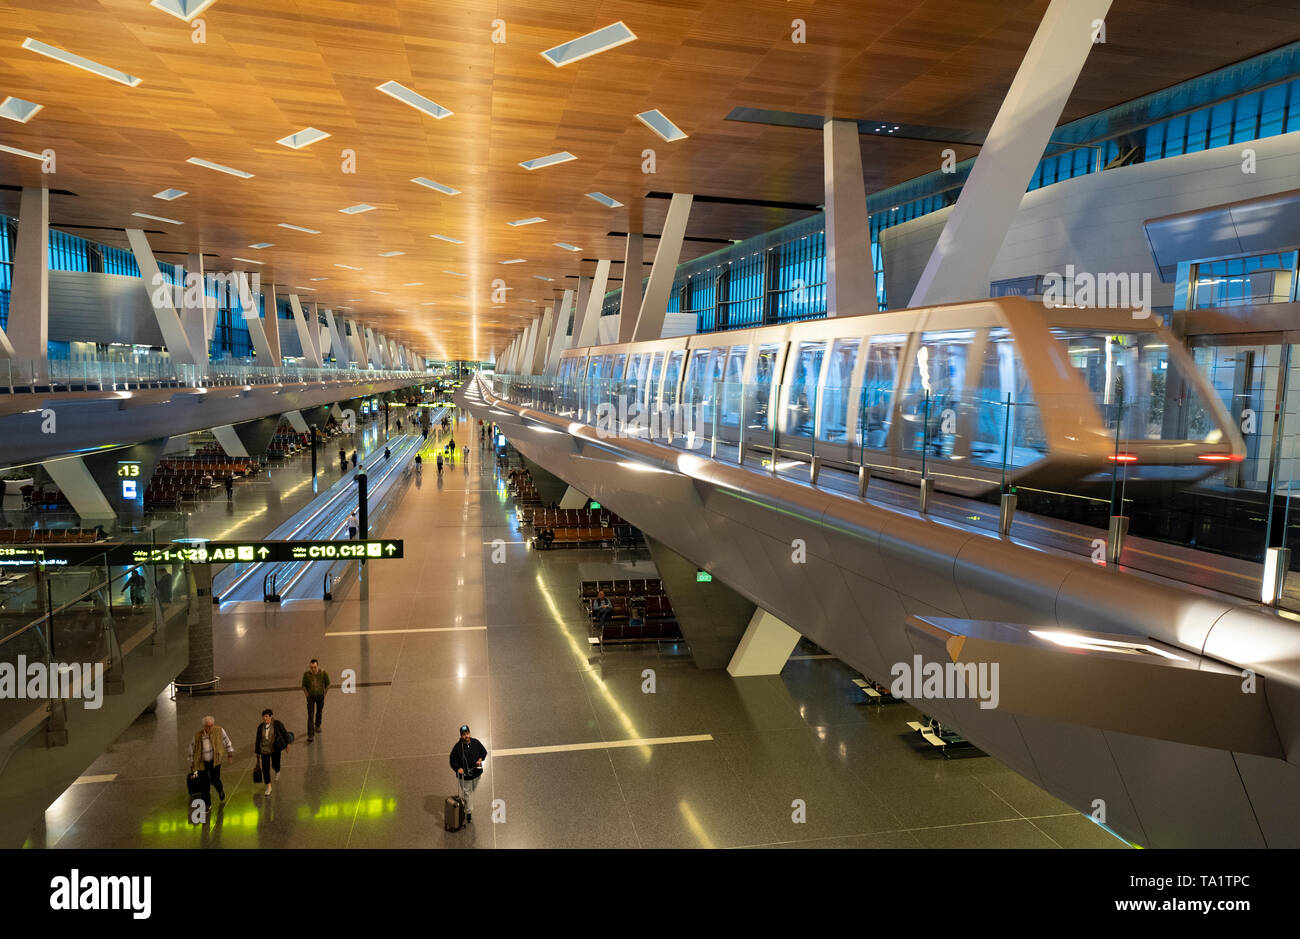 Elevated passenger shuttle train in terminal building at Hamad International Airport in Doha, Qatar Stock Photo